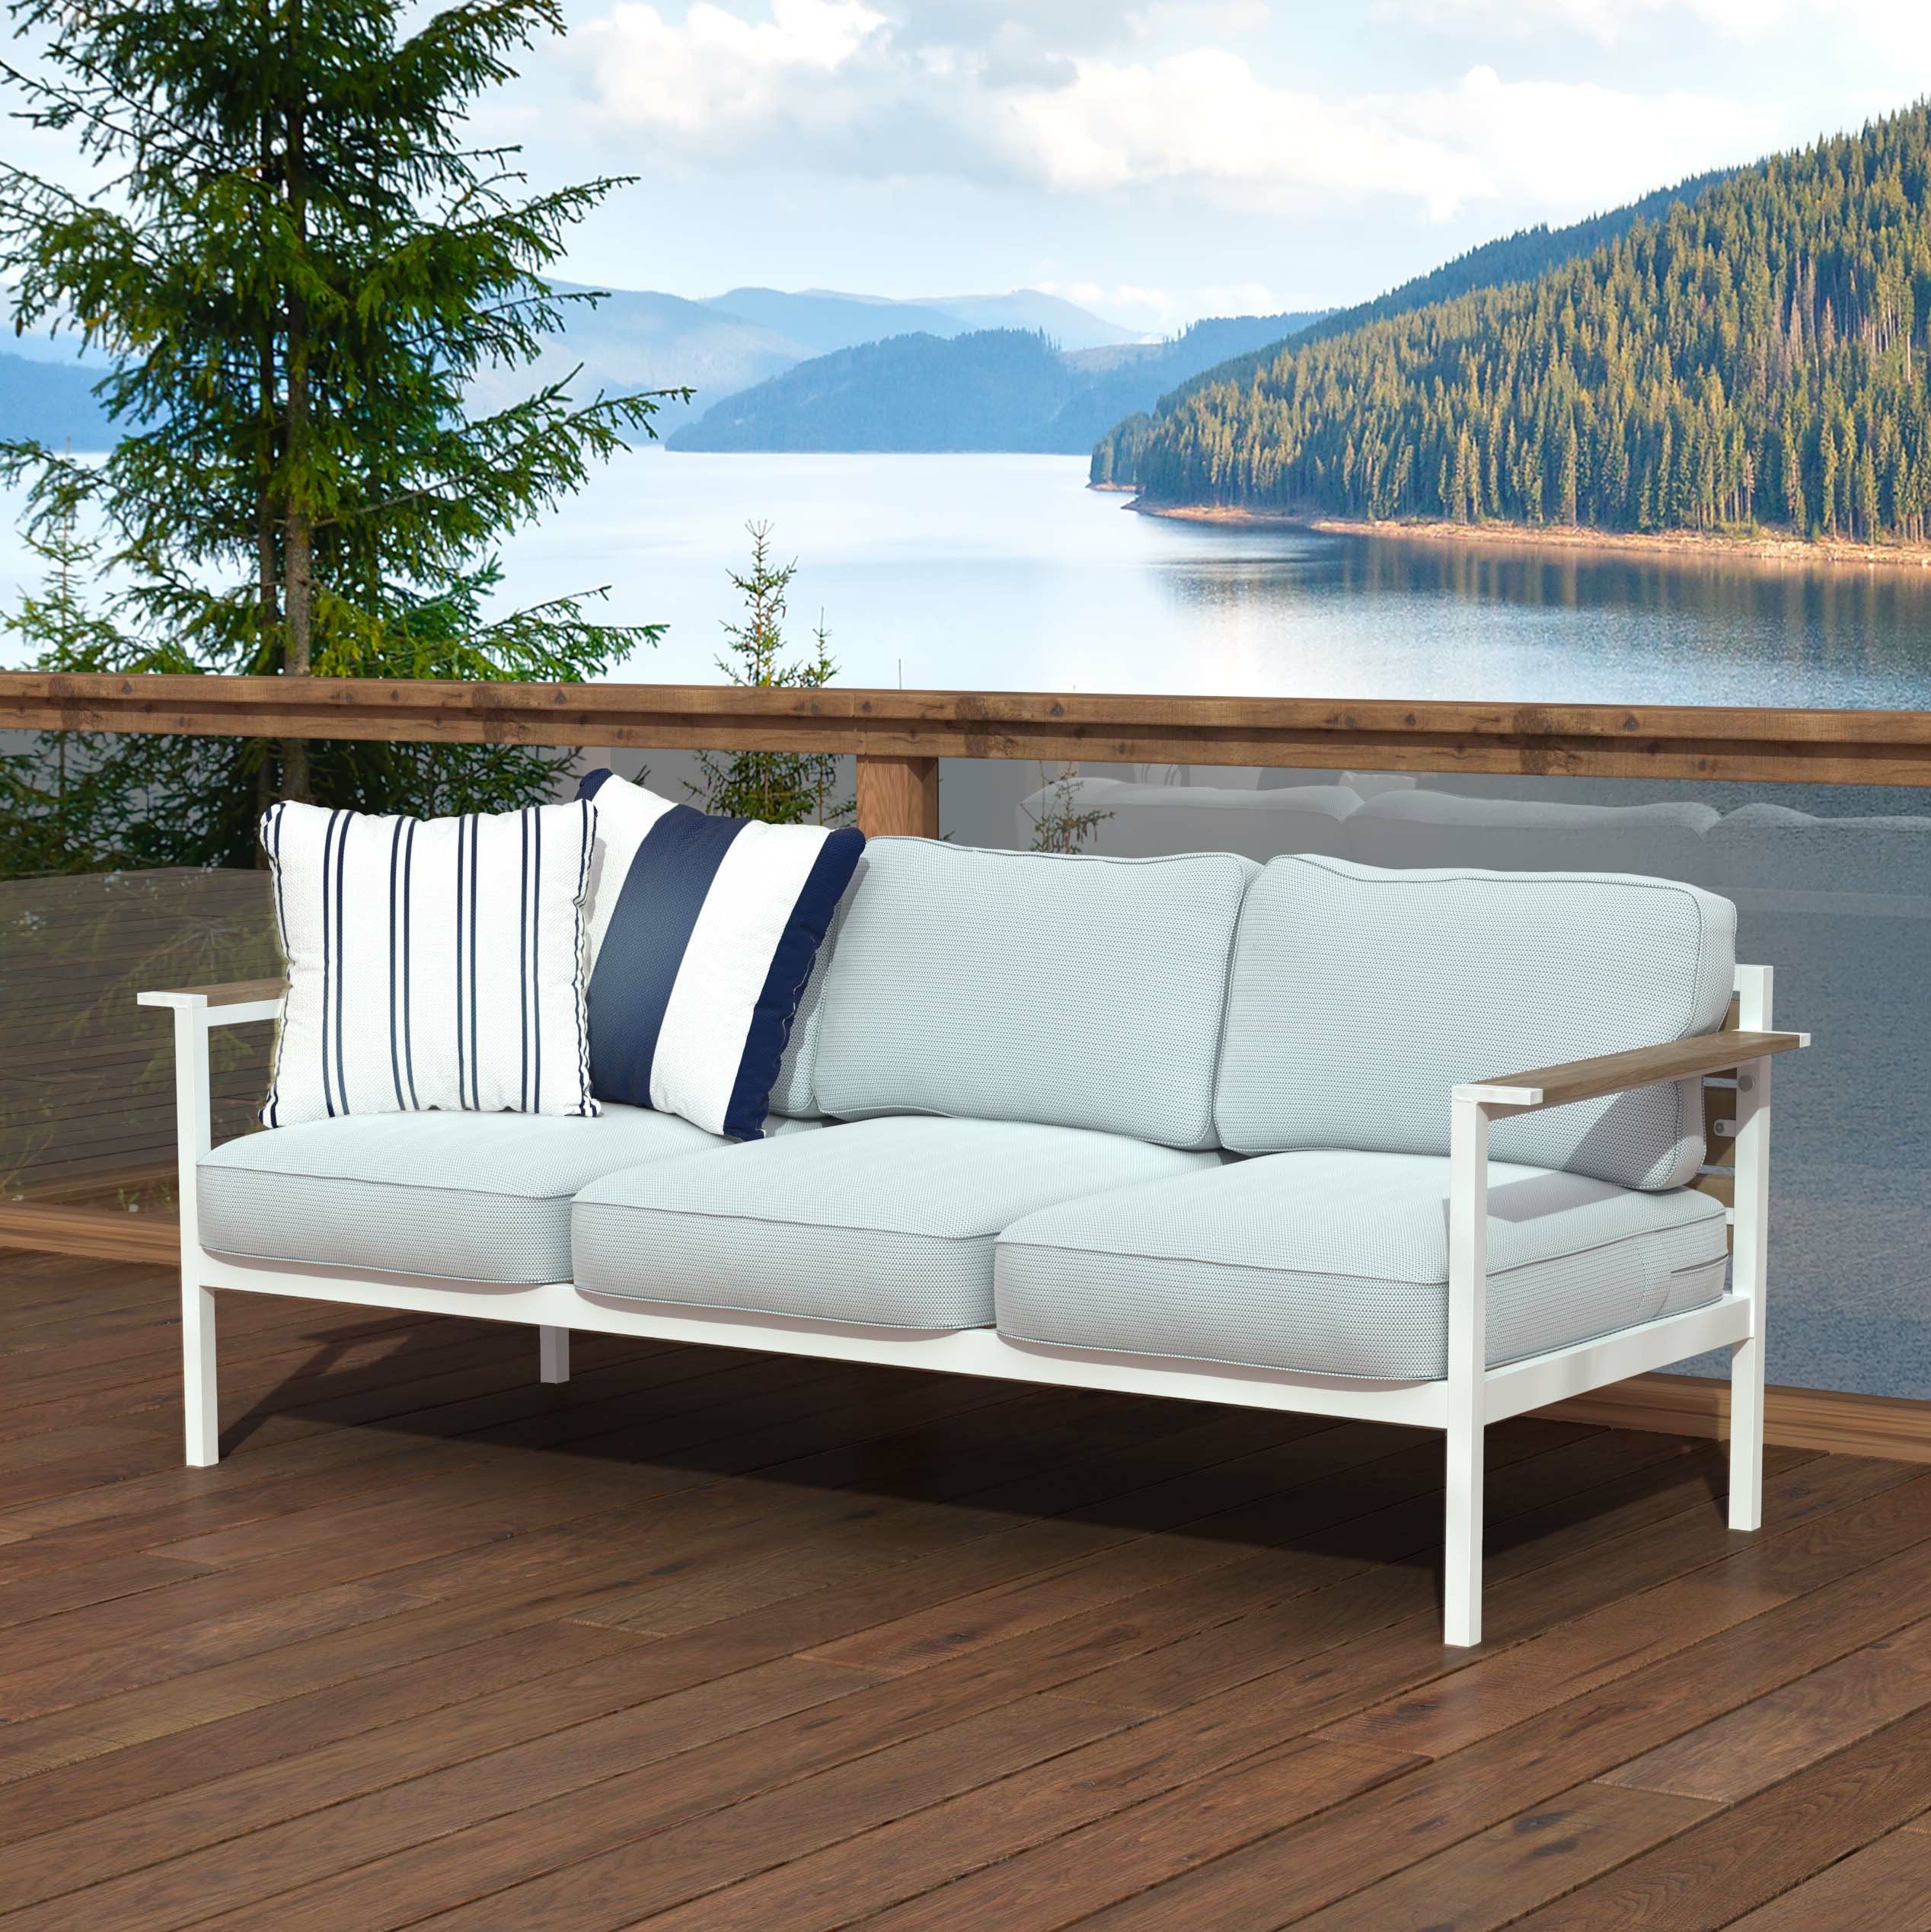 Lobdell Patio Sofas With Cushions With Most Up To Date Kayser Patio Sofa With Cushions (View 5 of 25)